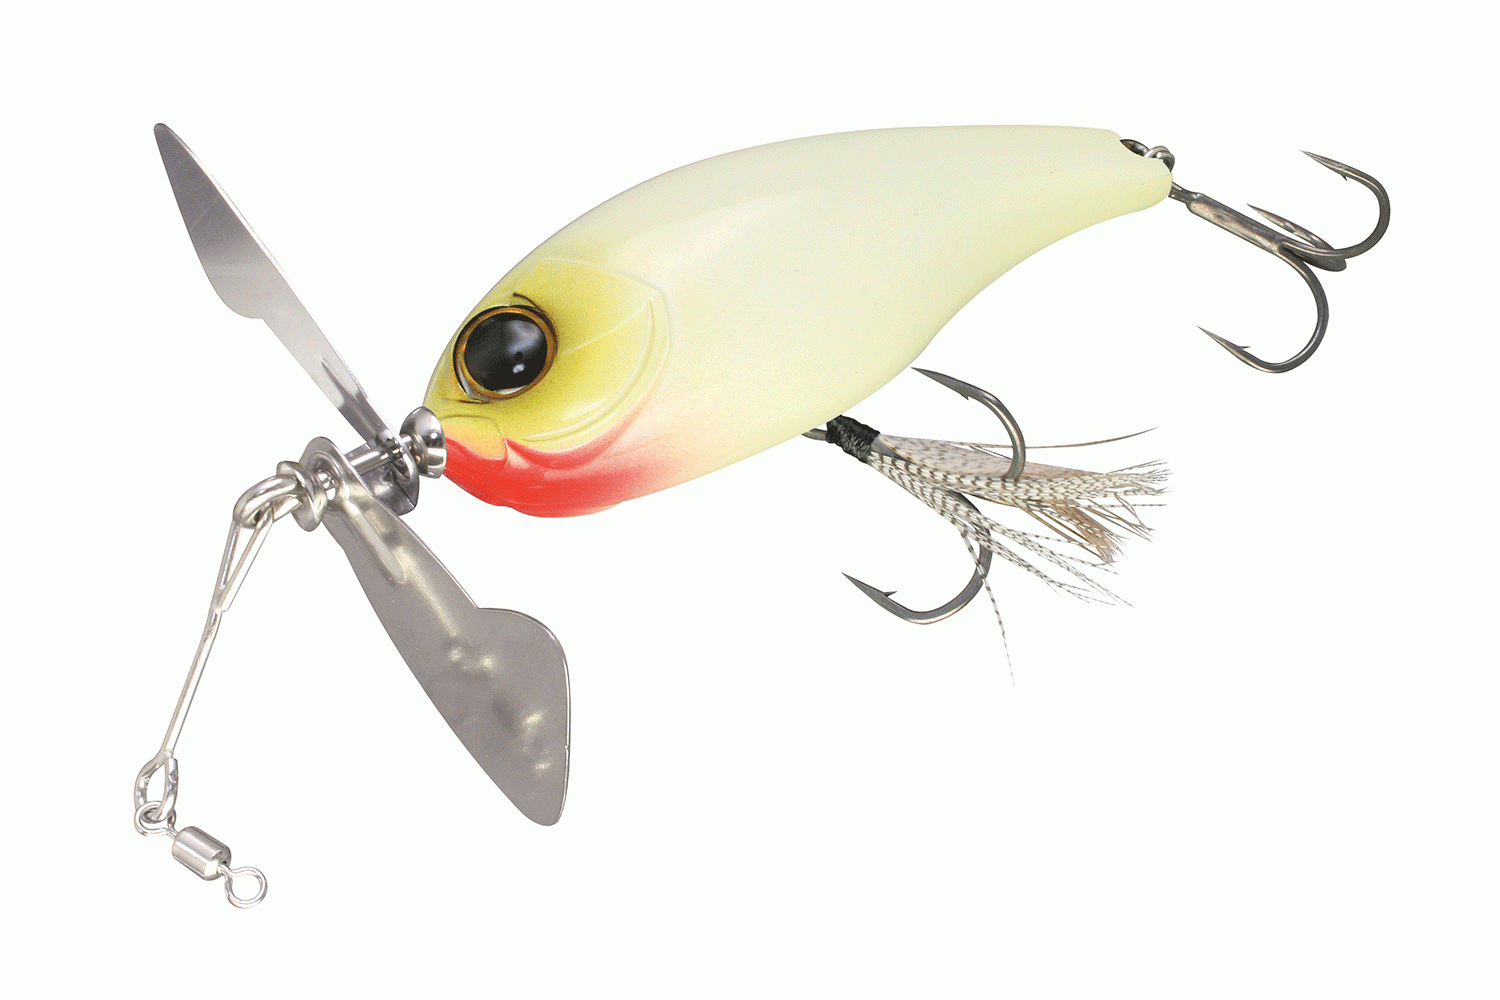 <p><b>Jackall Lures ChopCut, $22.99</b></p> With an asymmetrical prop design to ensure proper rotation and creating different sounds depending on retrieve speed, Jackallâs new ChopCut topwater lure features a front wire with attached swivel. Anglers can cast freely without their line tangling with the prop, plus a swiveling feathered front hook helps prevent bass from spitting the lure. Jackall puts a special coating on both the front and rear treble hooks for easier penetration. The 3 1/4-inch ChopCut topwaters weigh in at 0.8-ounces and are offered in six colors - green frog, black white bone, RT chartreuse gill, bone white, skeleton bone and HL bluegill. <a href=